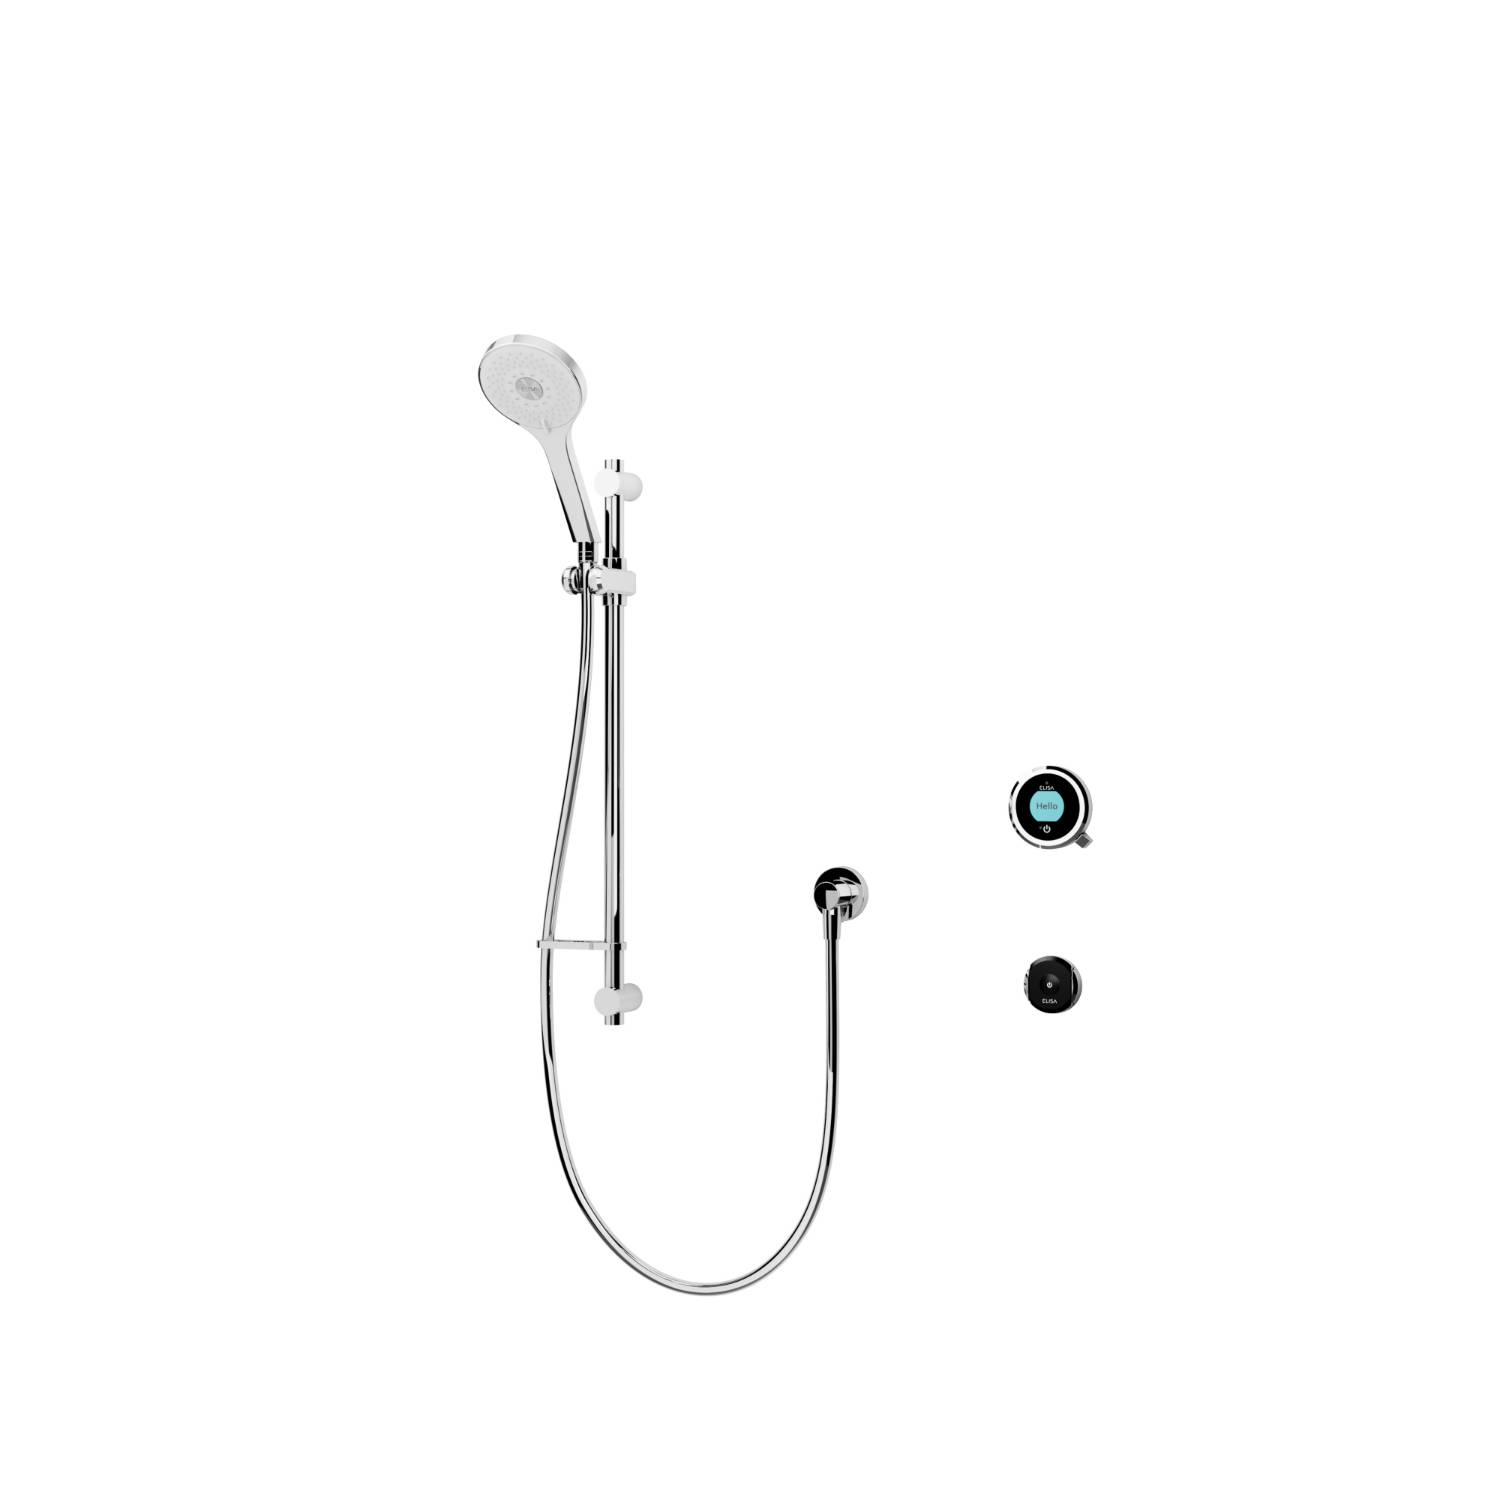 Intuition Concealed Adjustable Head with Remote GP